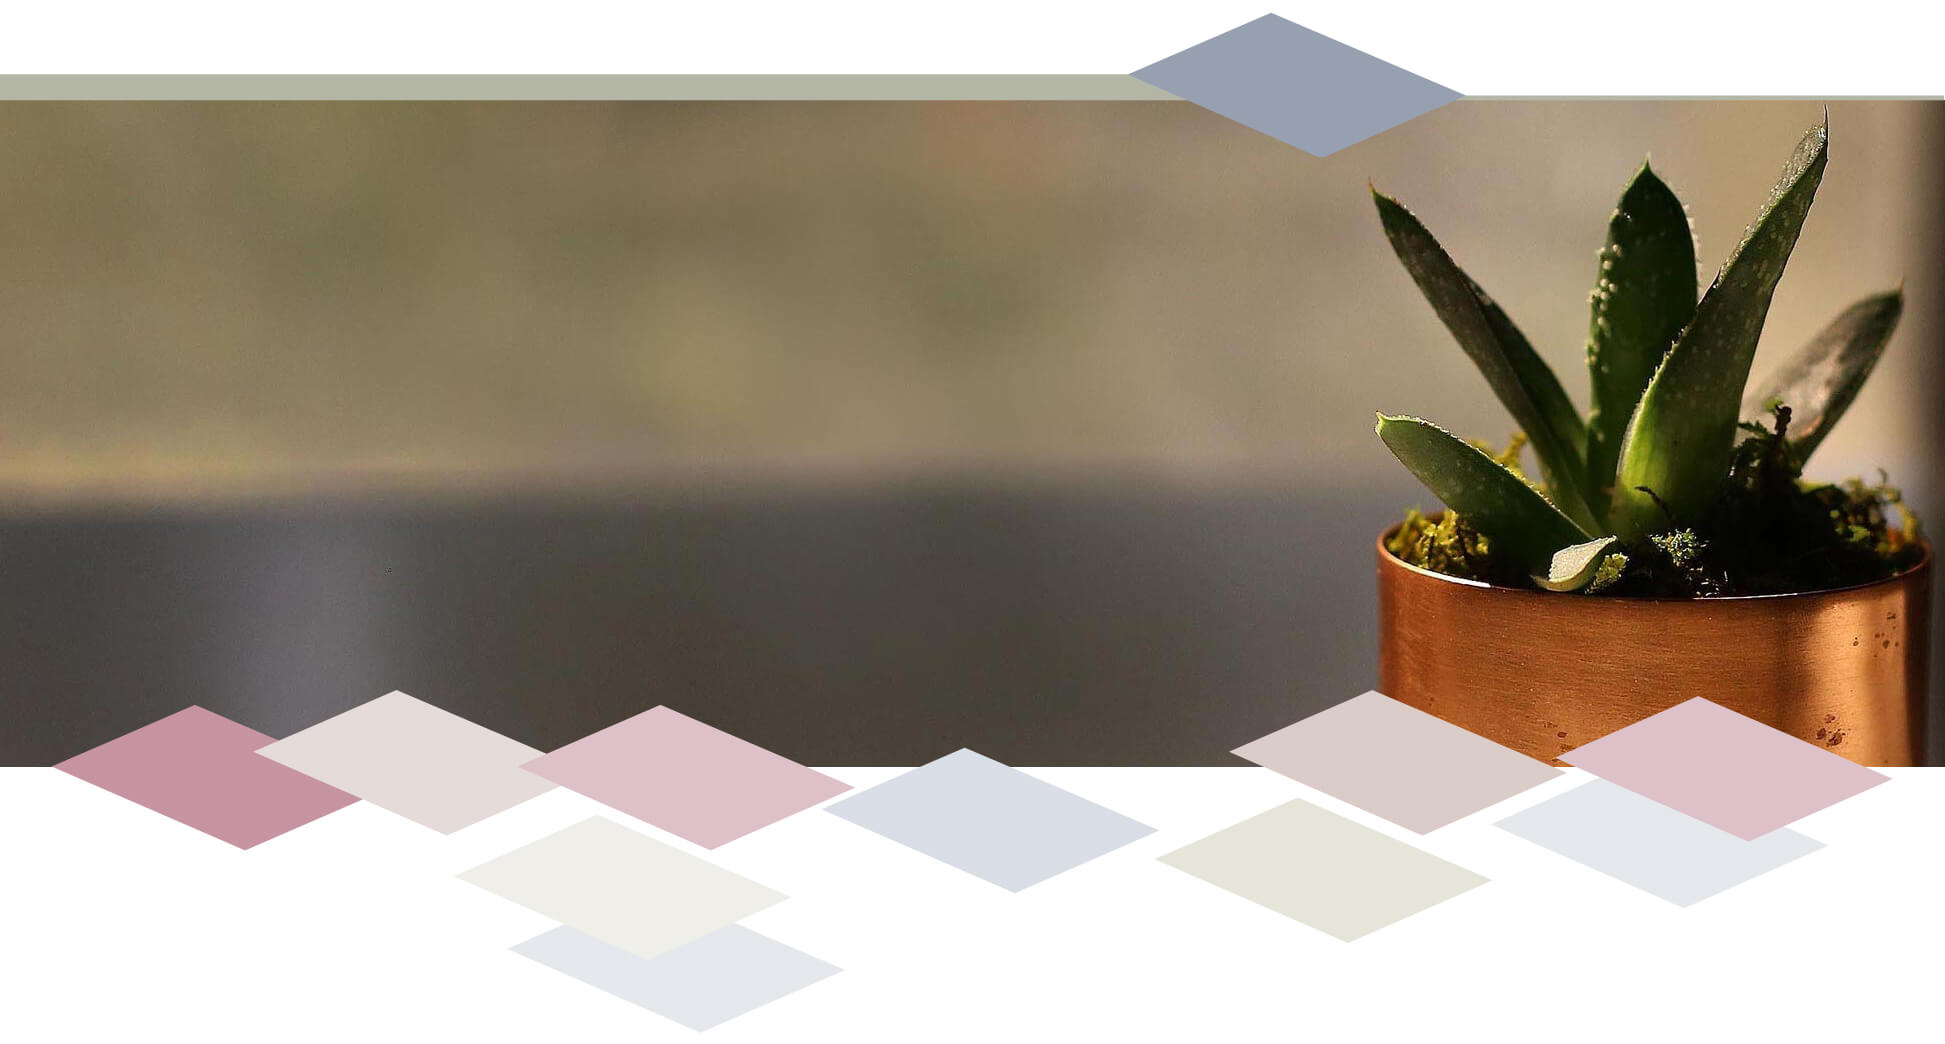 Background image of a potted succulent